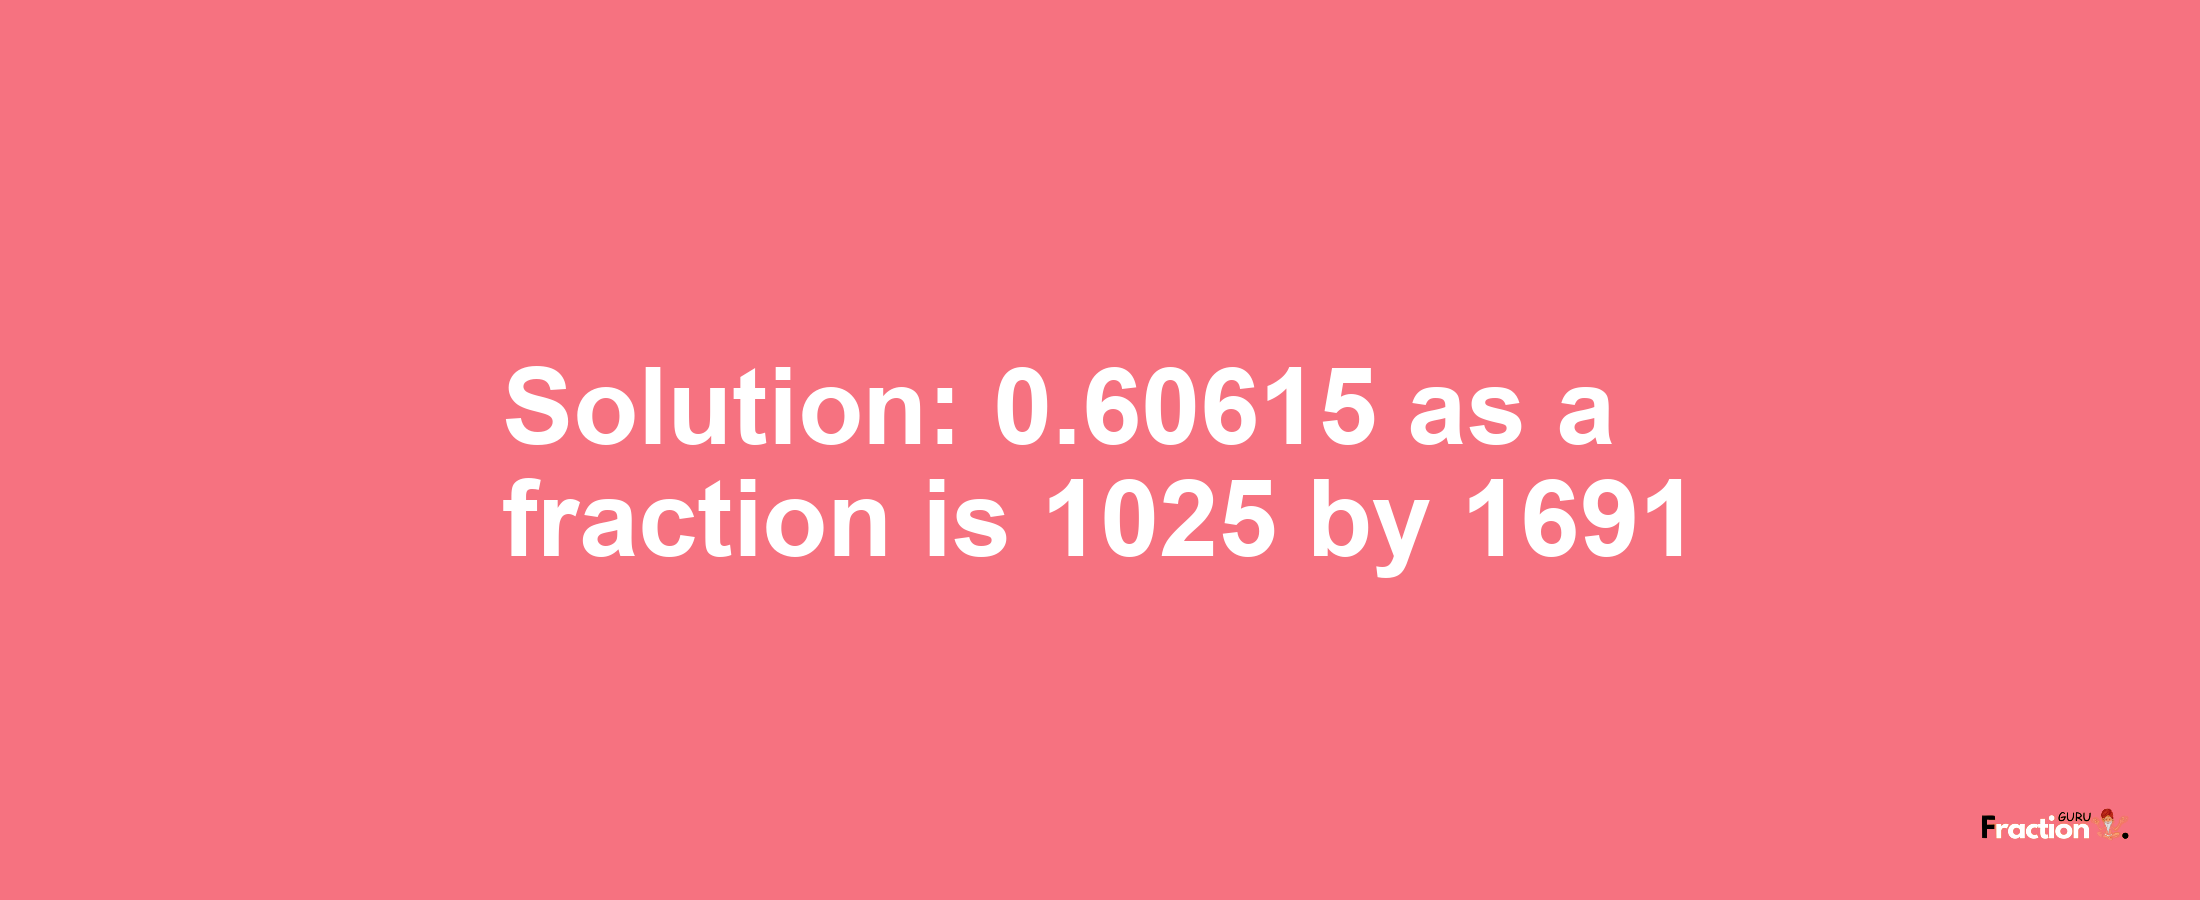 Solution:0.60615 as a fraction is 1025/1691